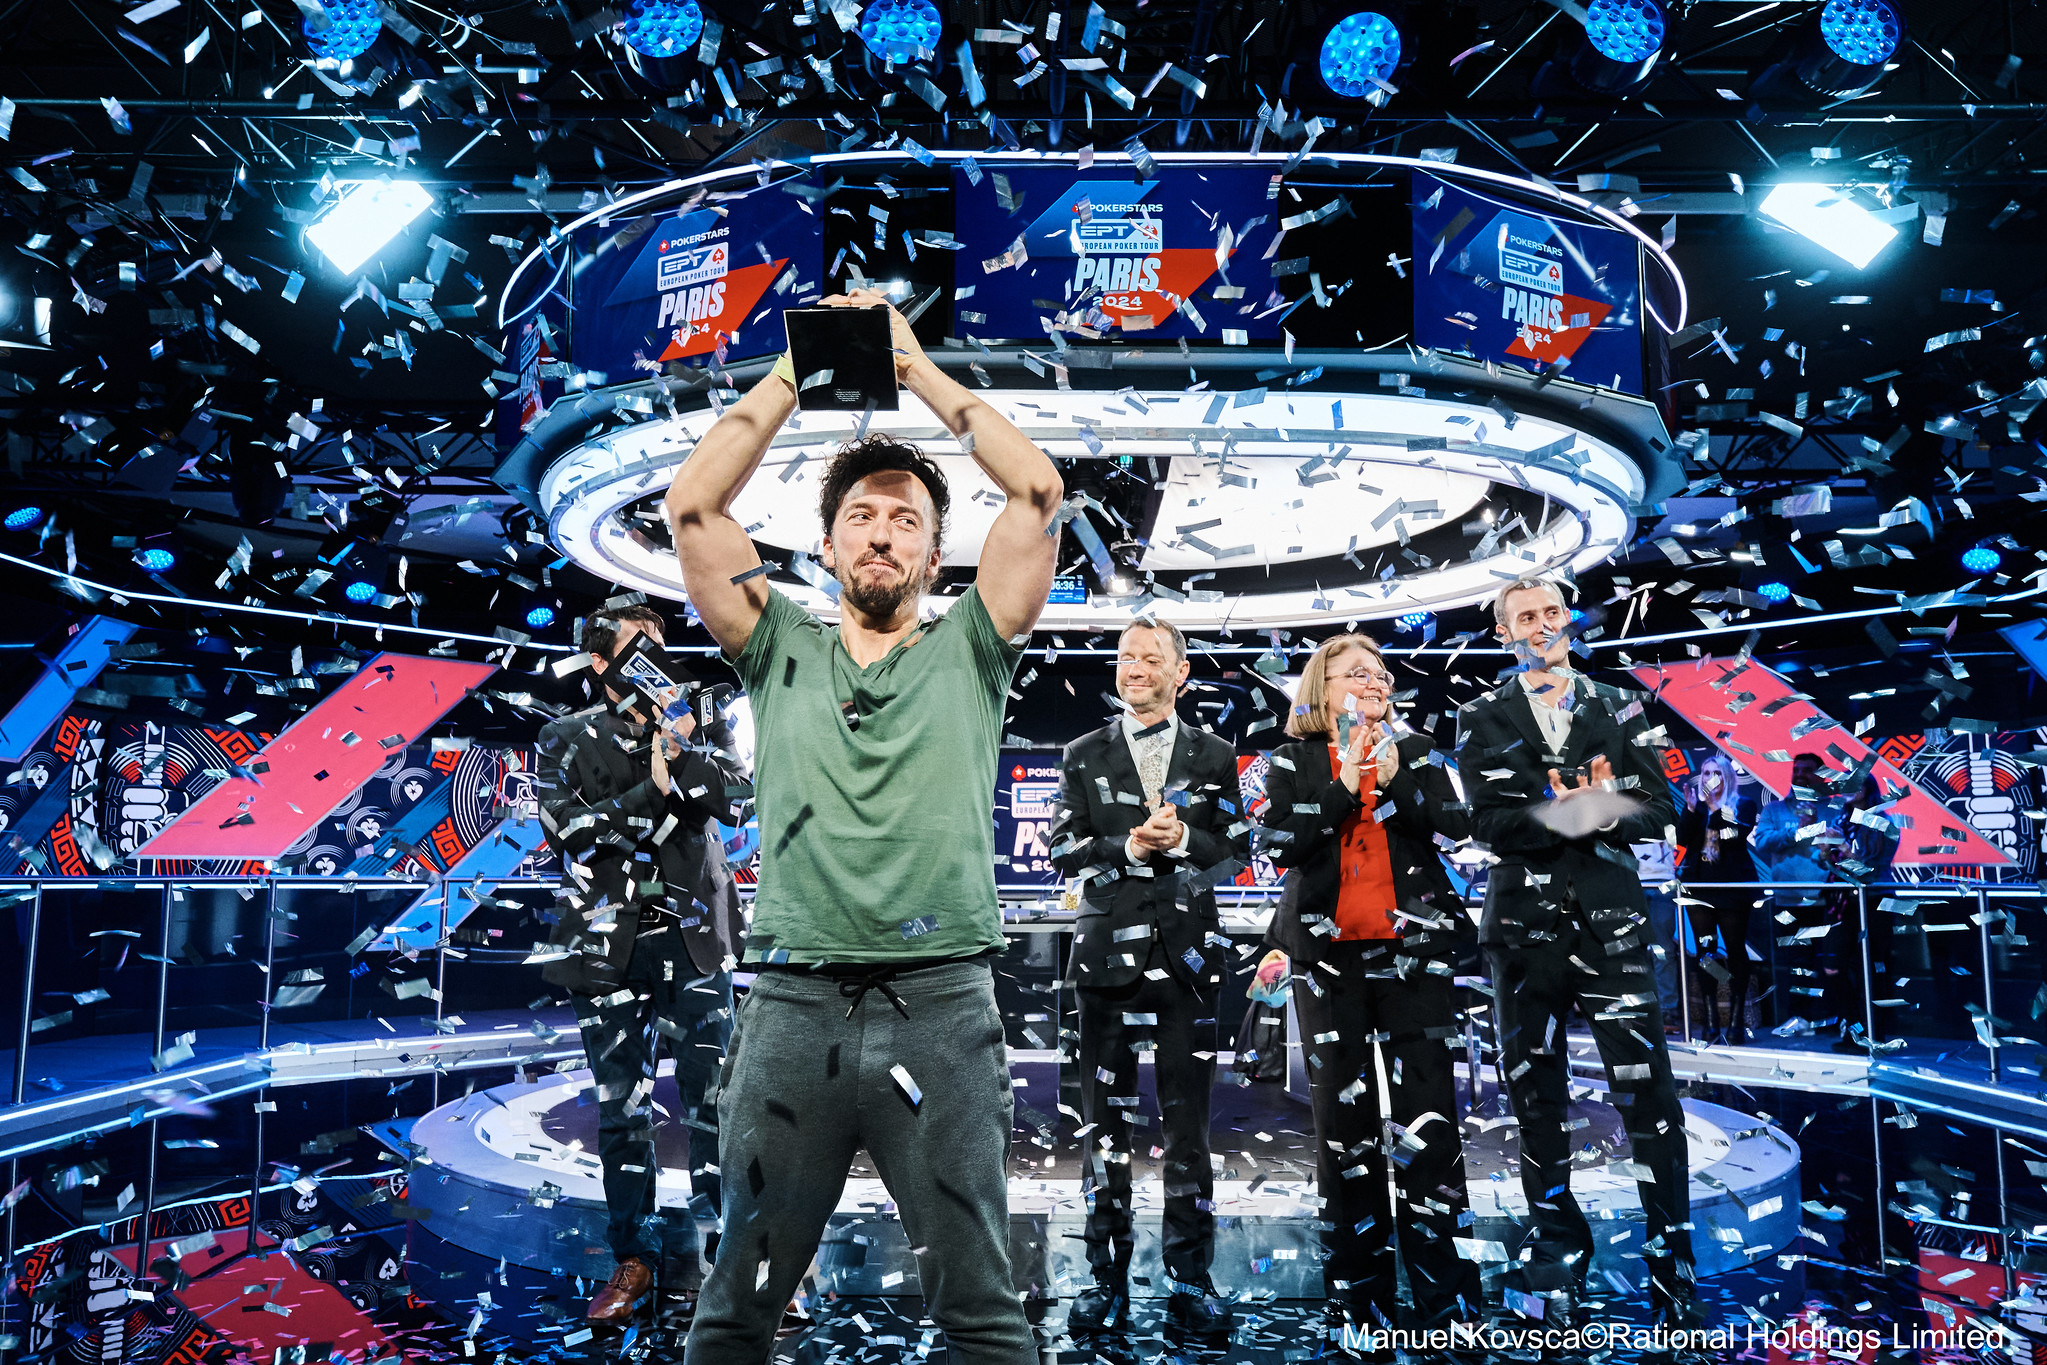 EPT: Spectacular start of the Main Event, Dutchman Moolhuizen the FPS champion